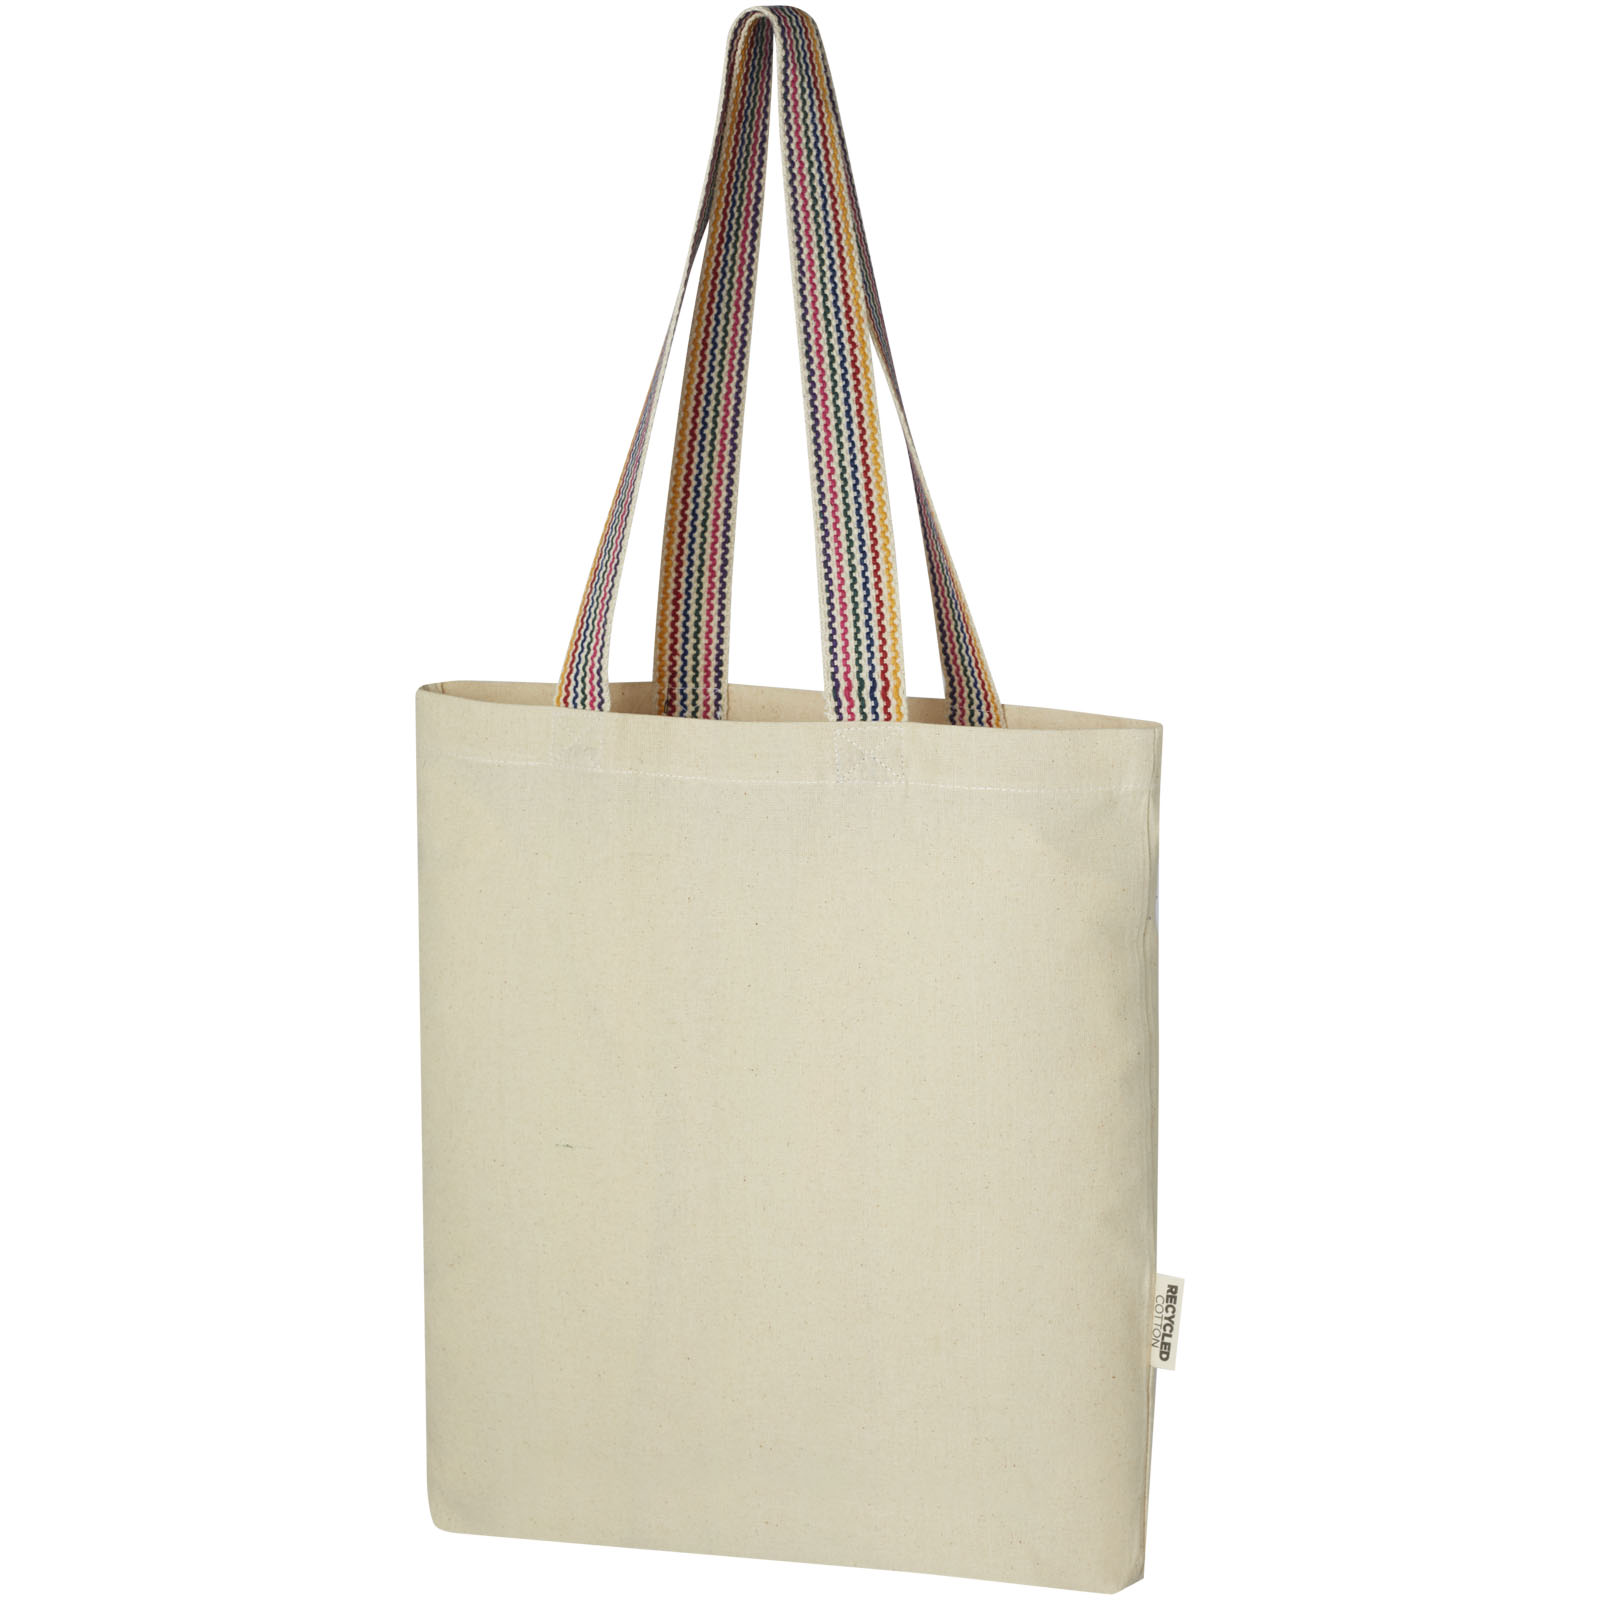 Bags - Rainbow 180 g/m² recycled cotton tote bag 5L